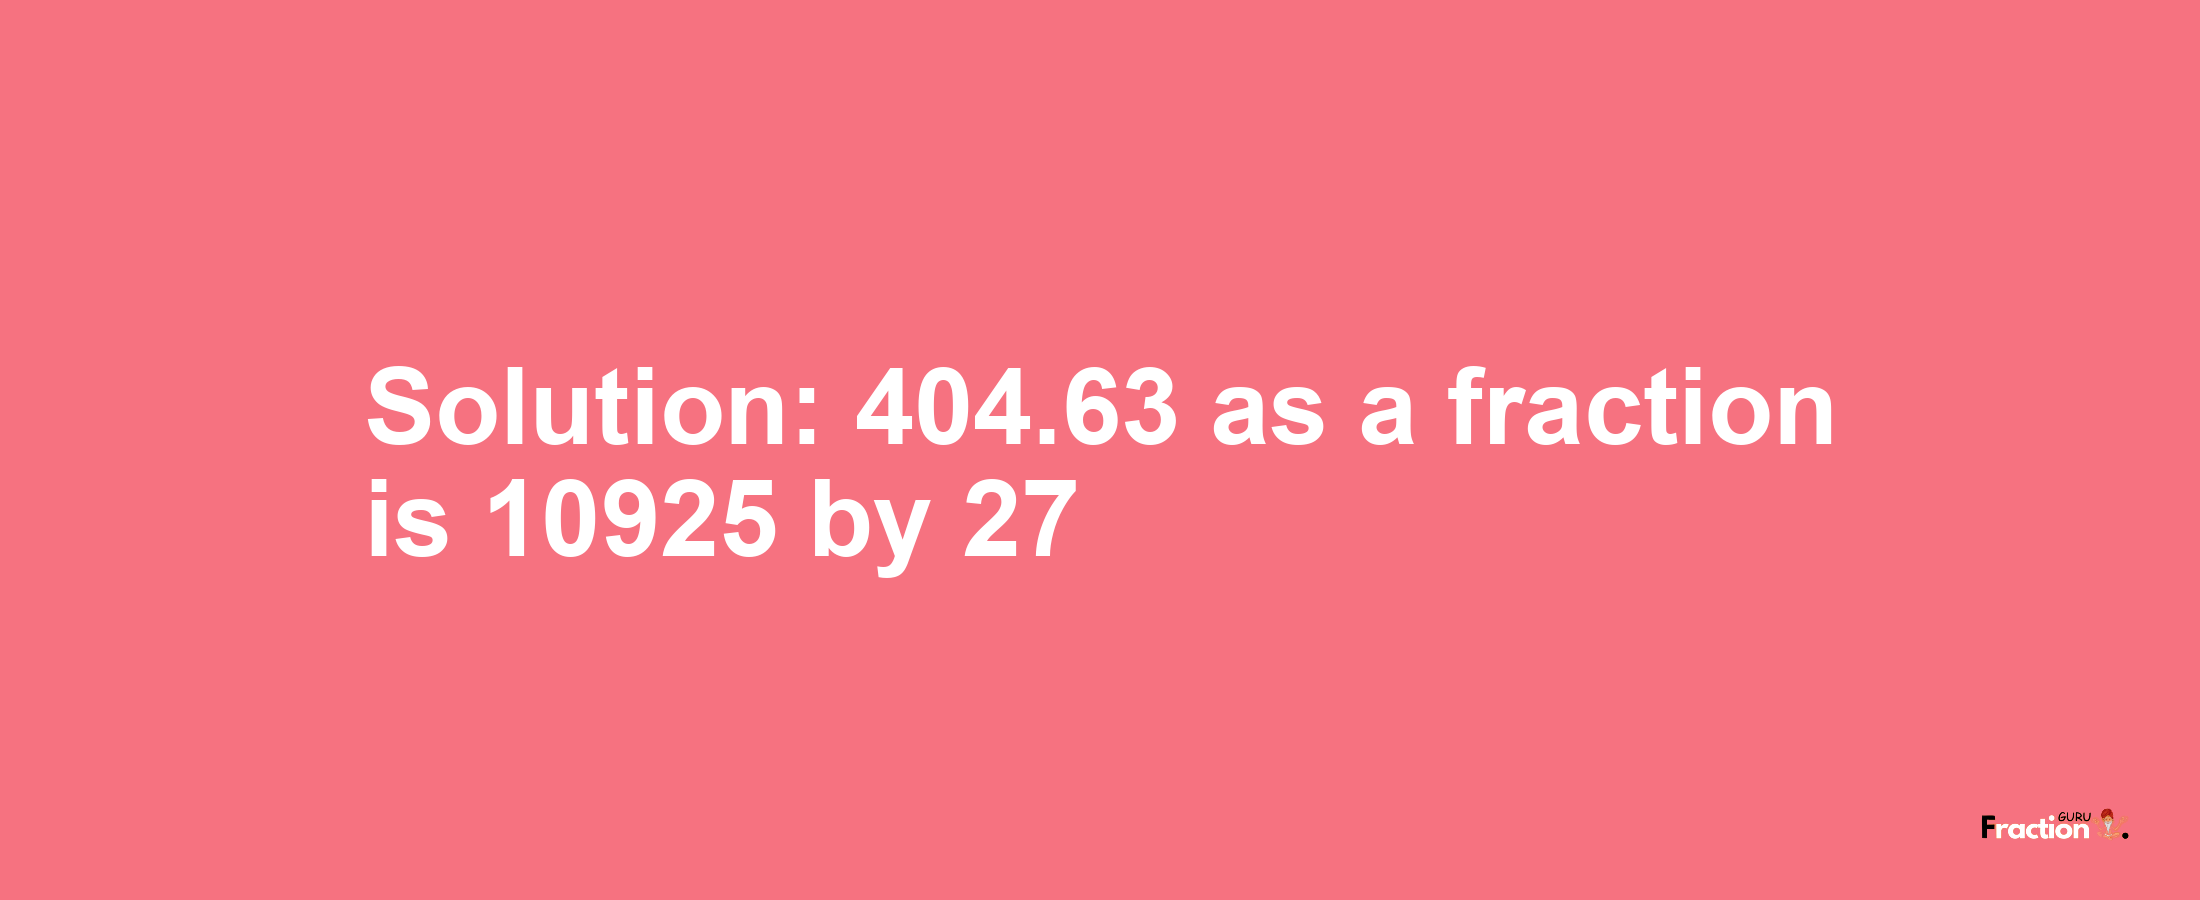 Solution:404.63 as a fraction is 10925/27